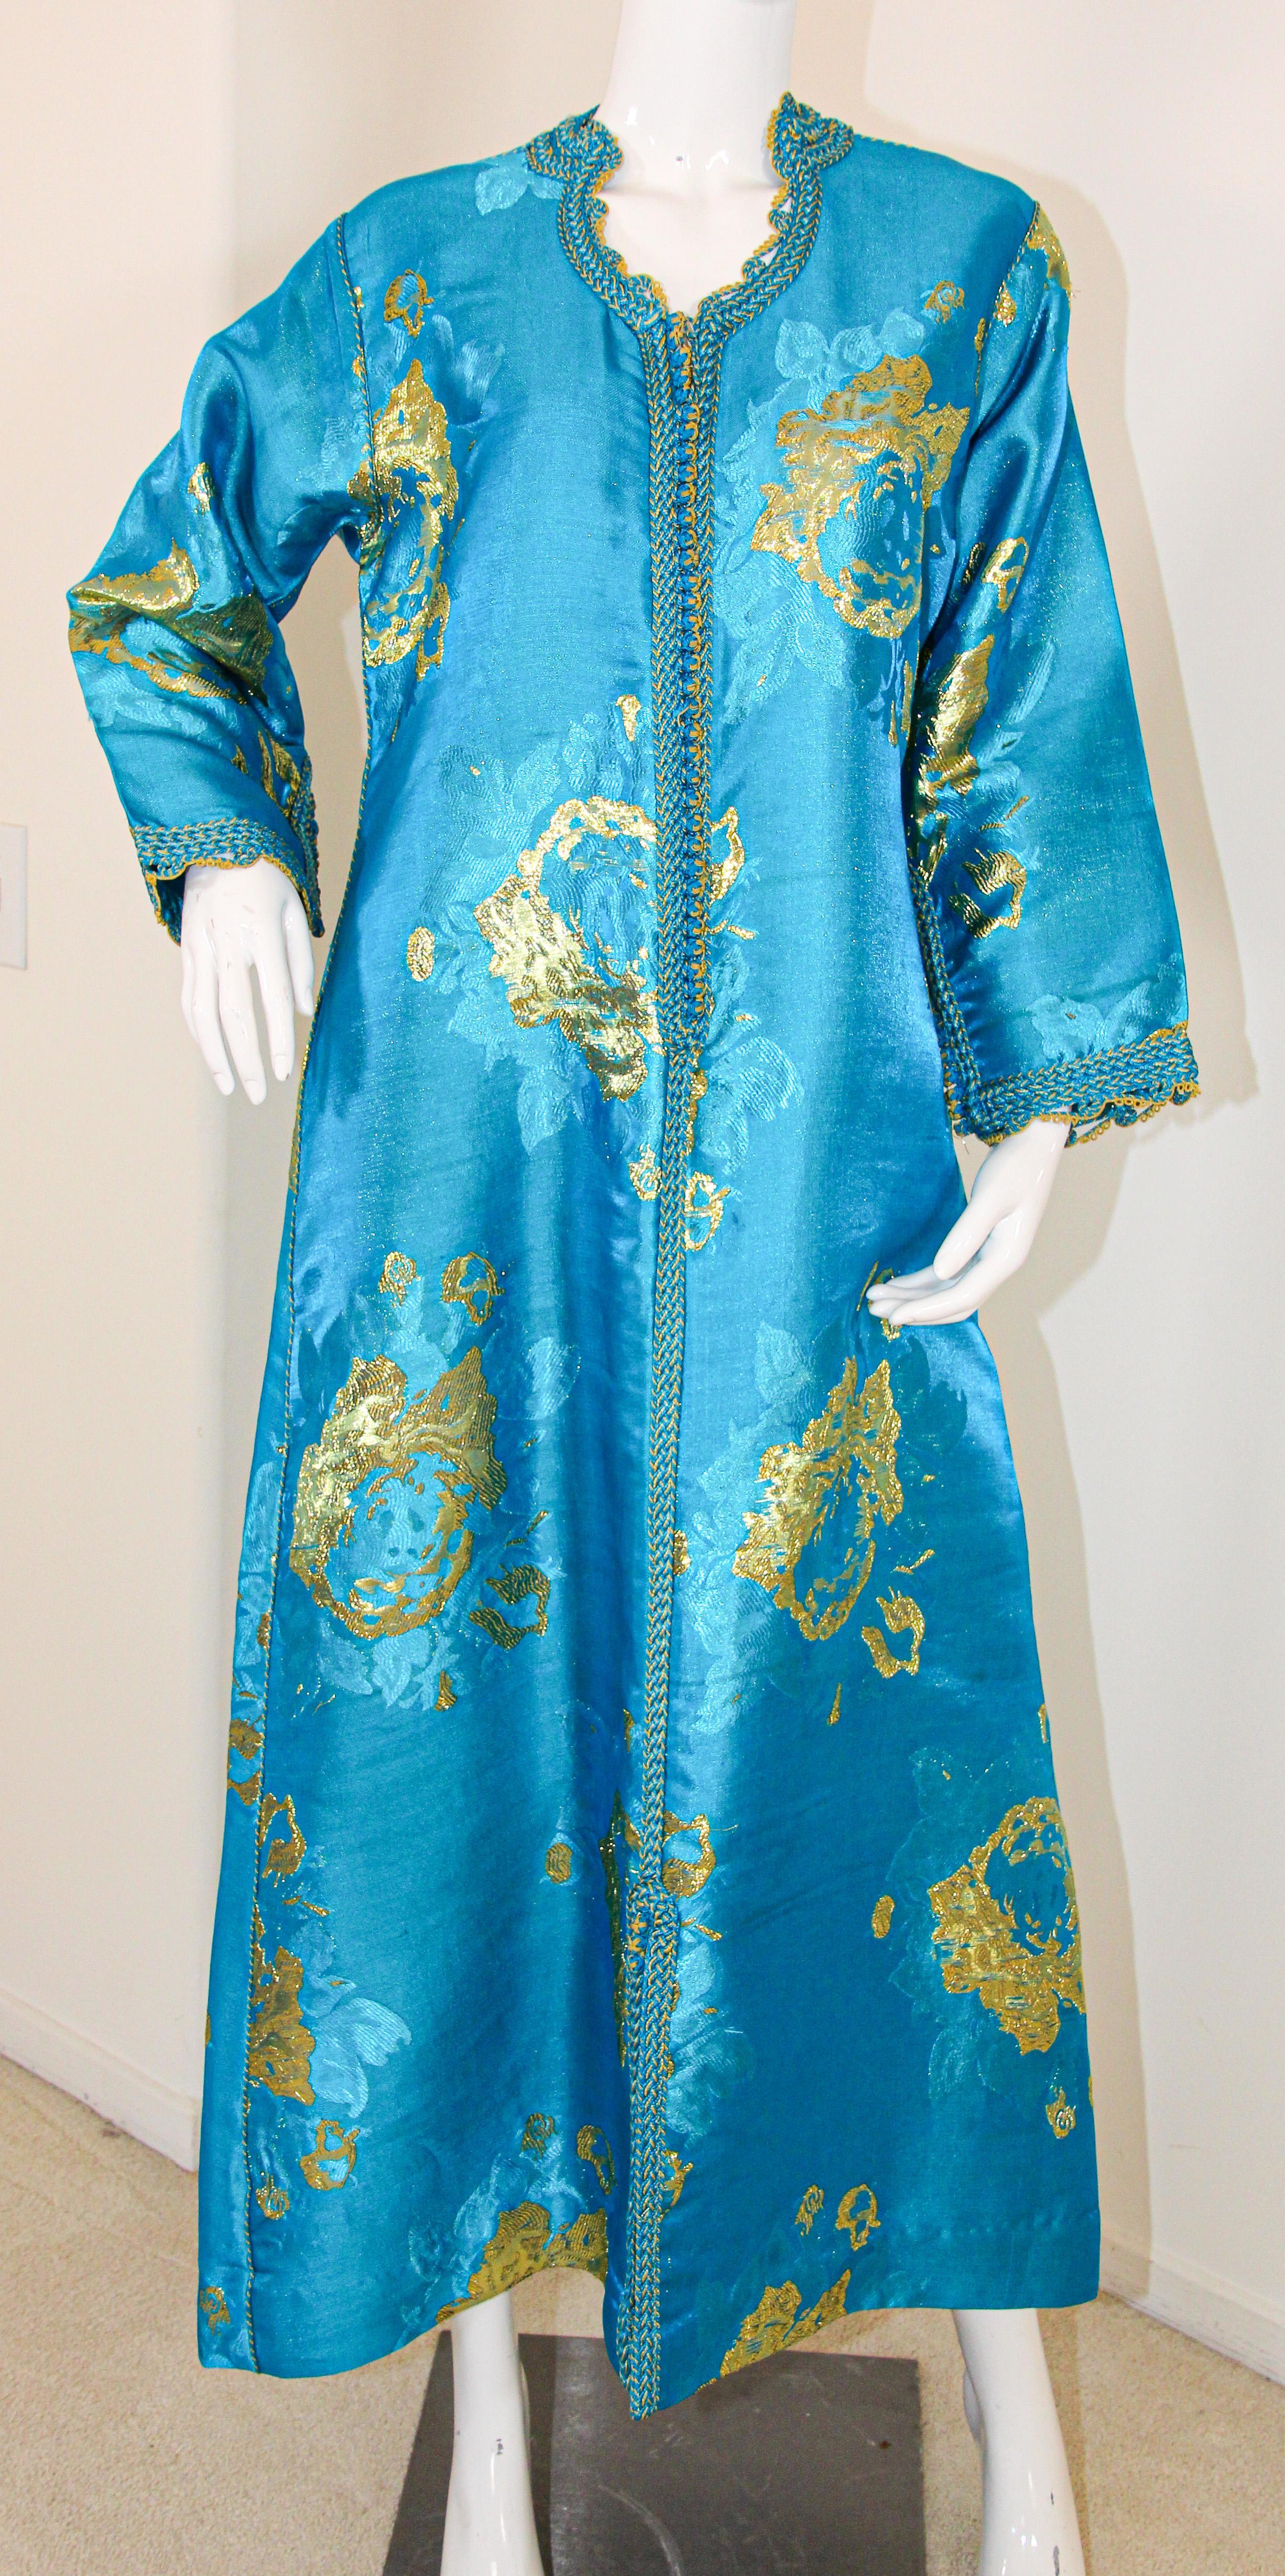 Moroccan Kaftan in Turquoise and Gold Floral Brocade Metallic Lame 9